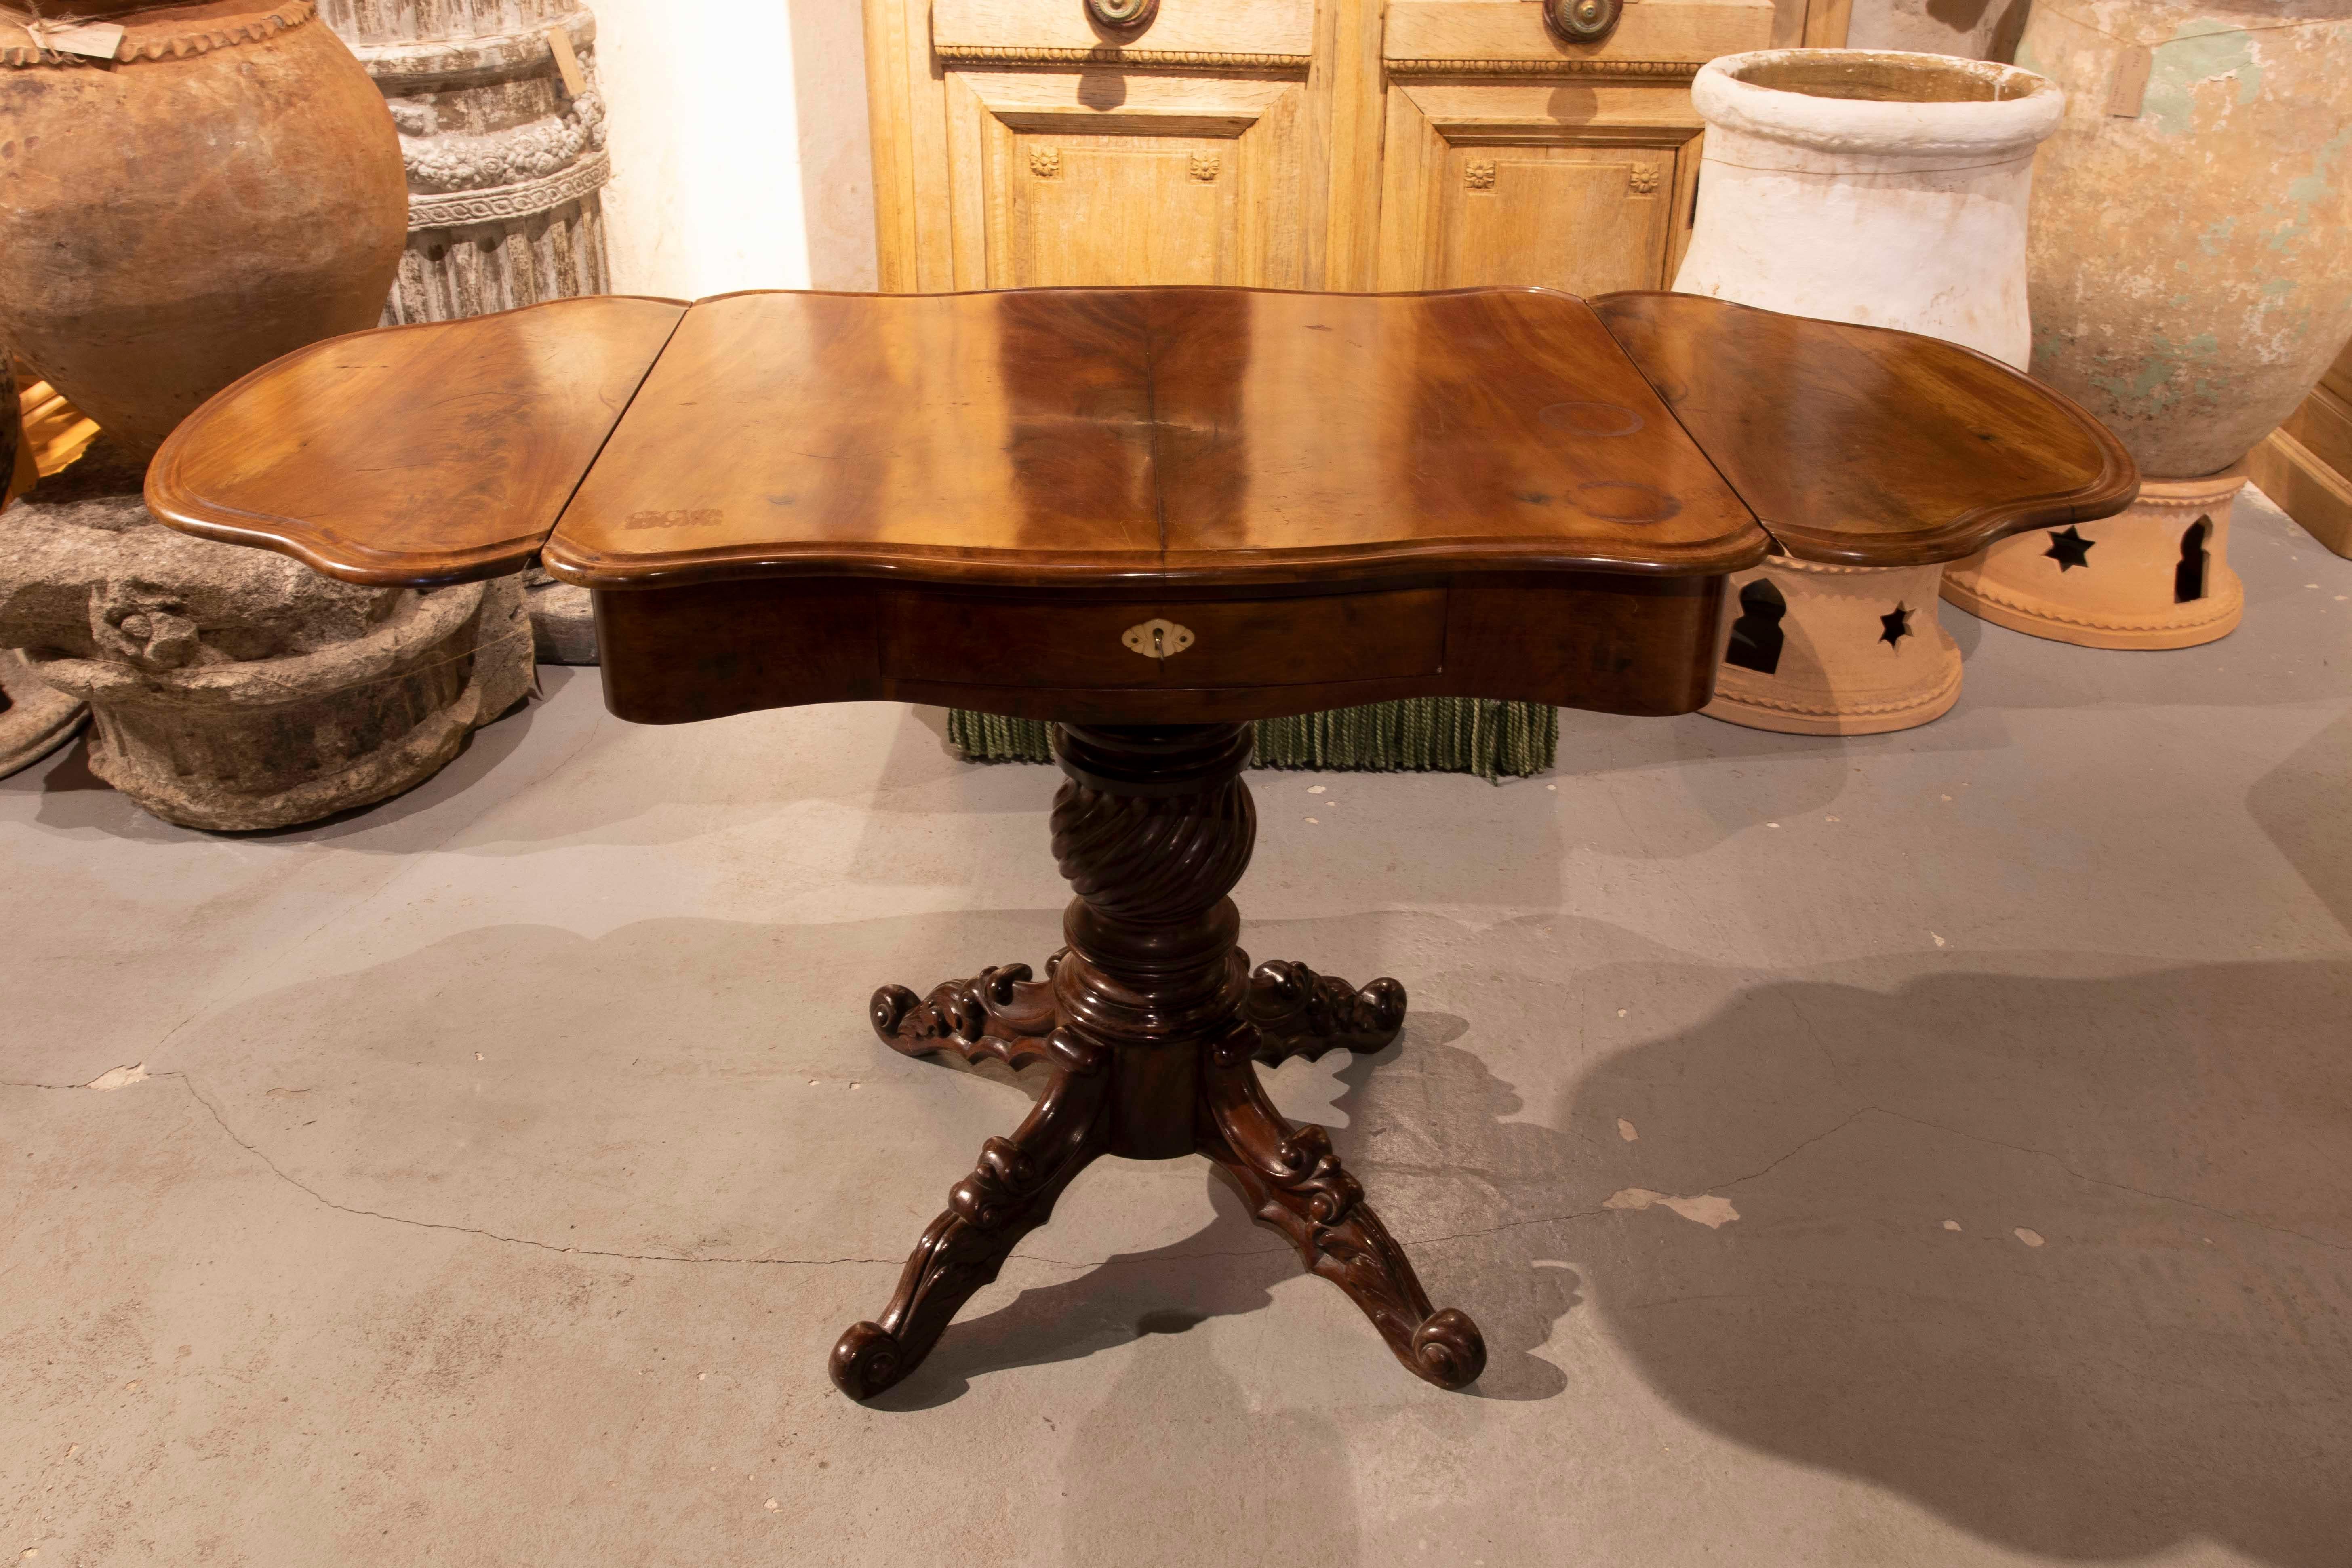 19th Century English Mahogany Wing Table with Drawer and Base in the Centre
Open Table 140cm